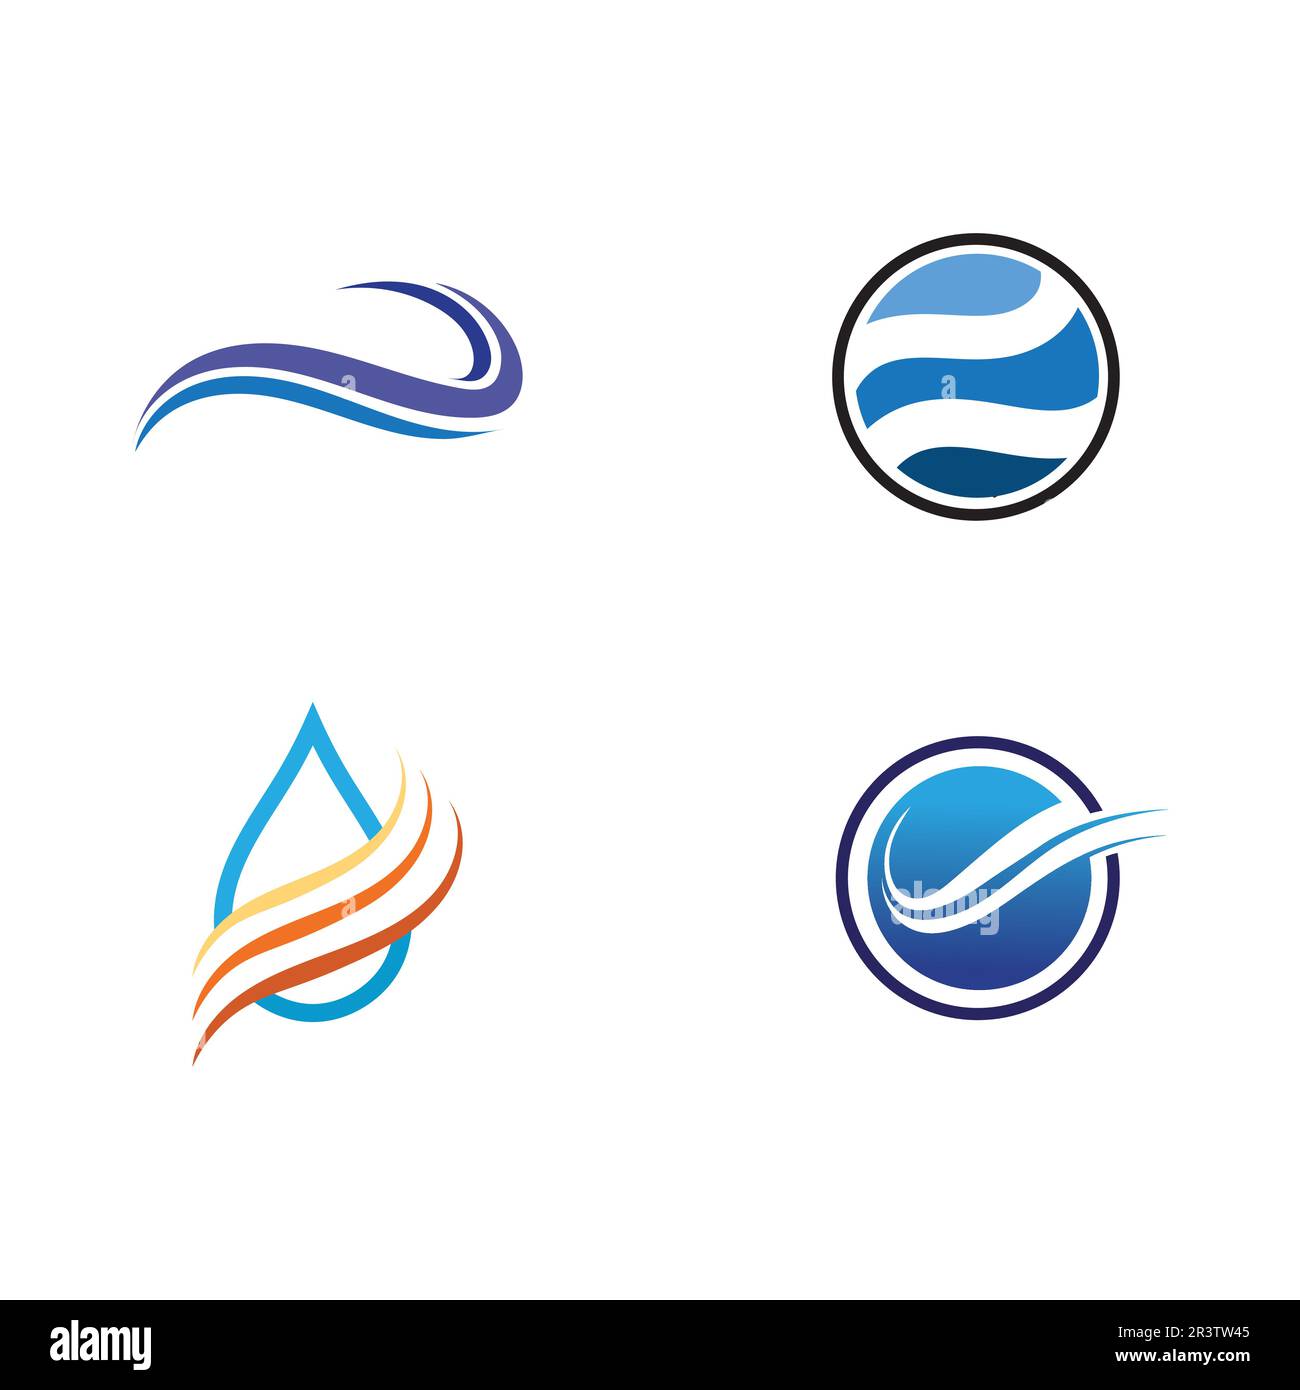 Isolated round shape logo. Blue color logotype. Flowing water image. Sea, ocean, river surface. Stock Vector